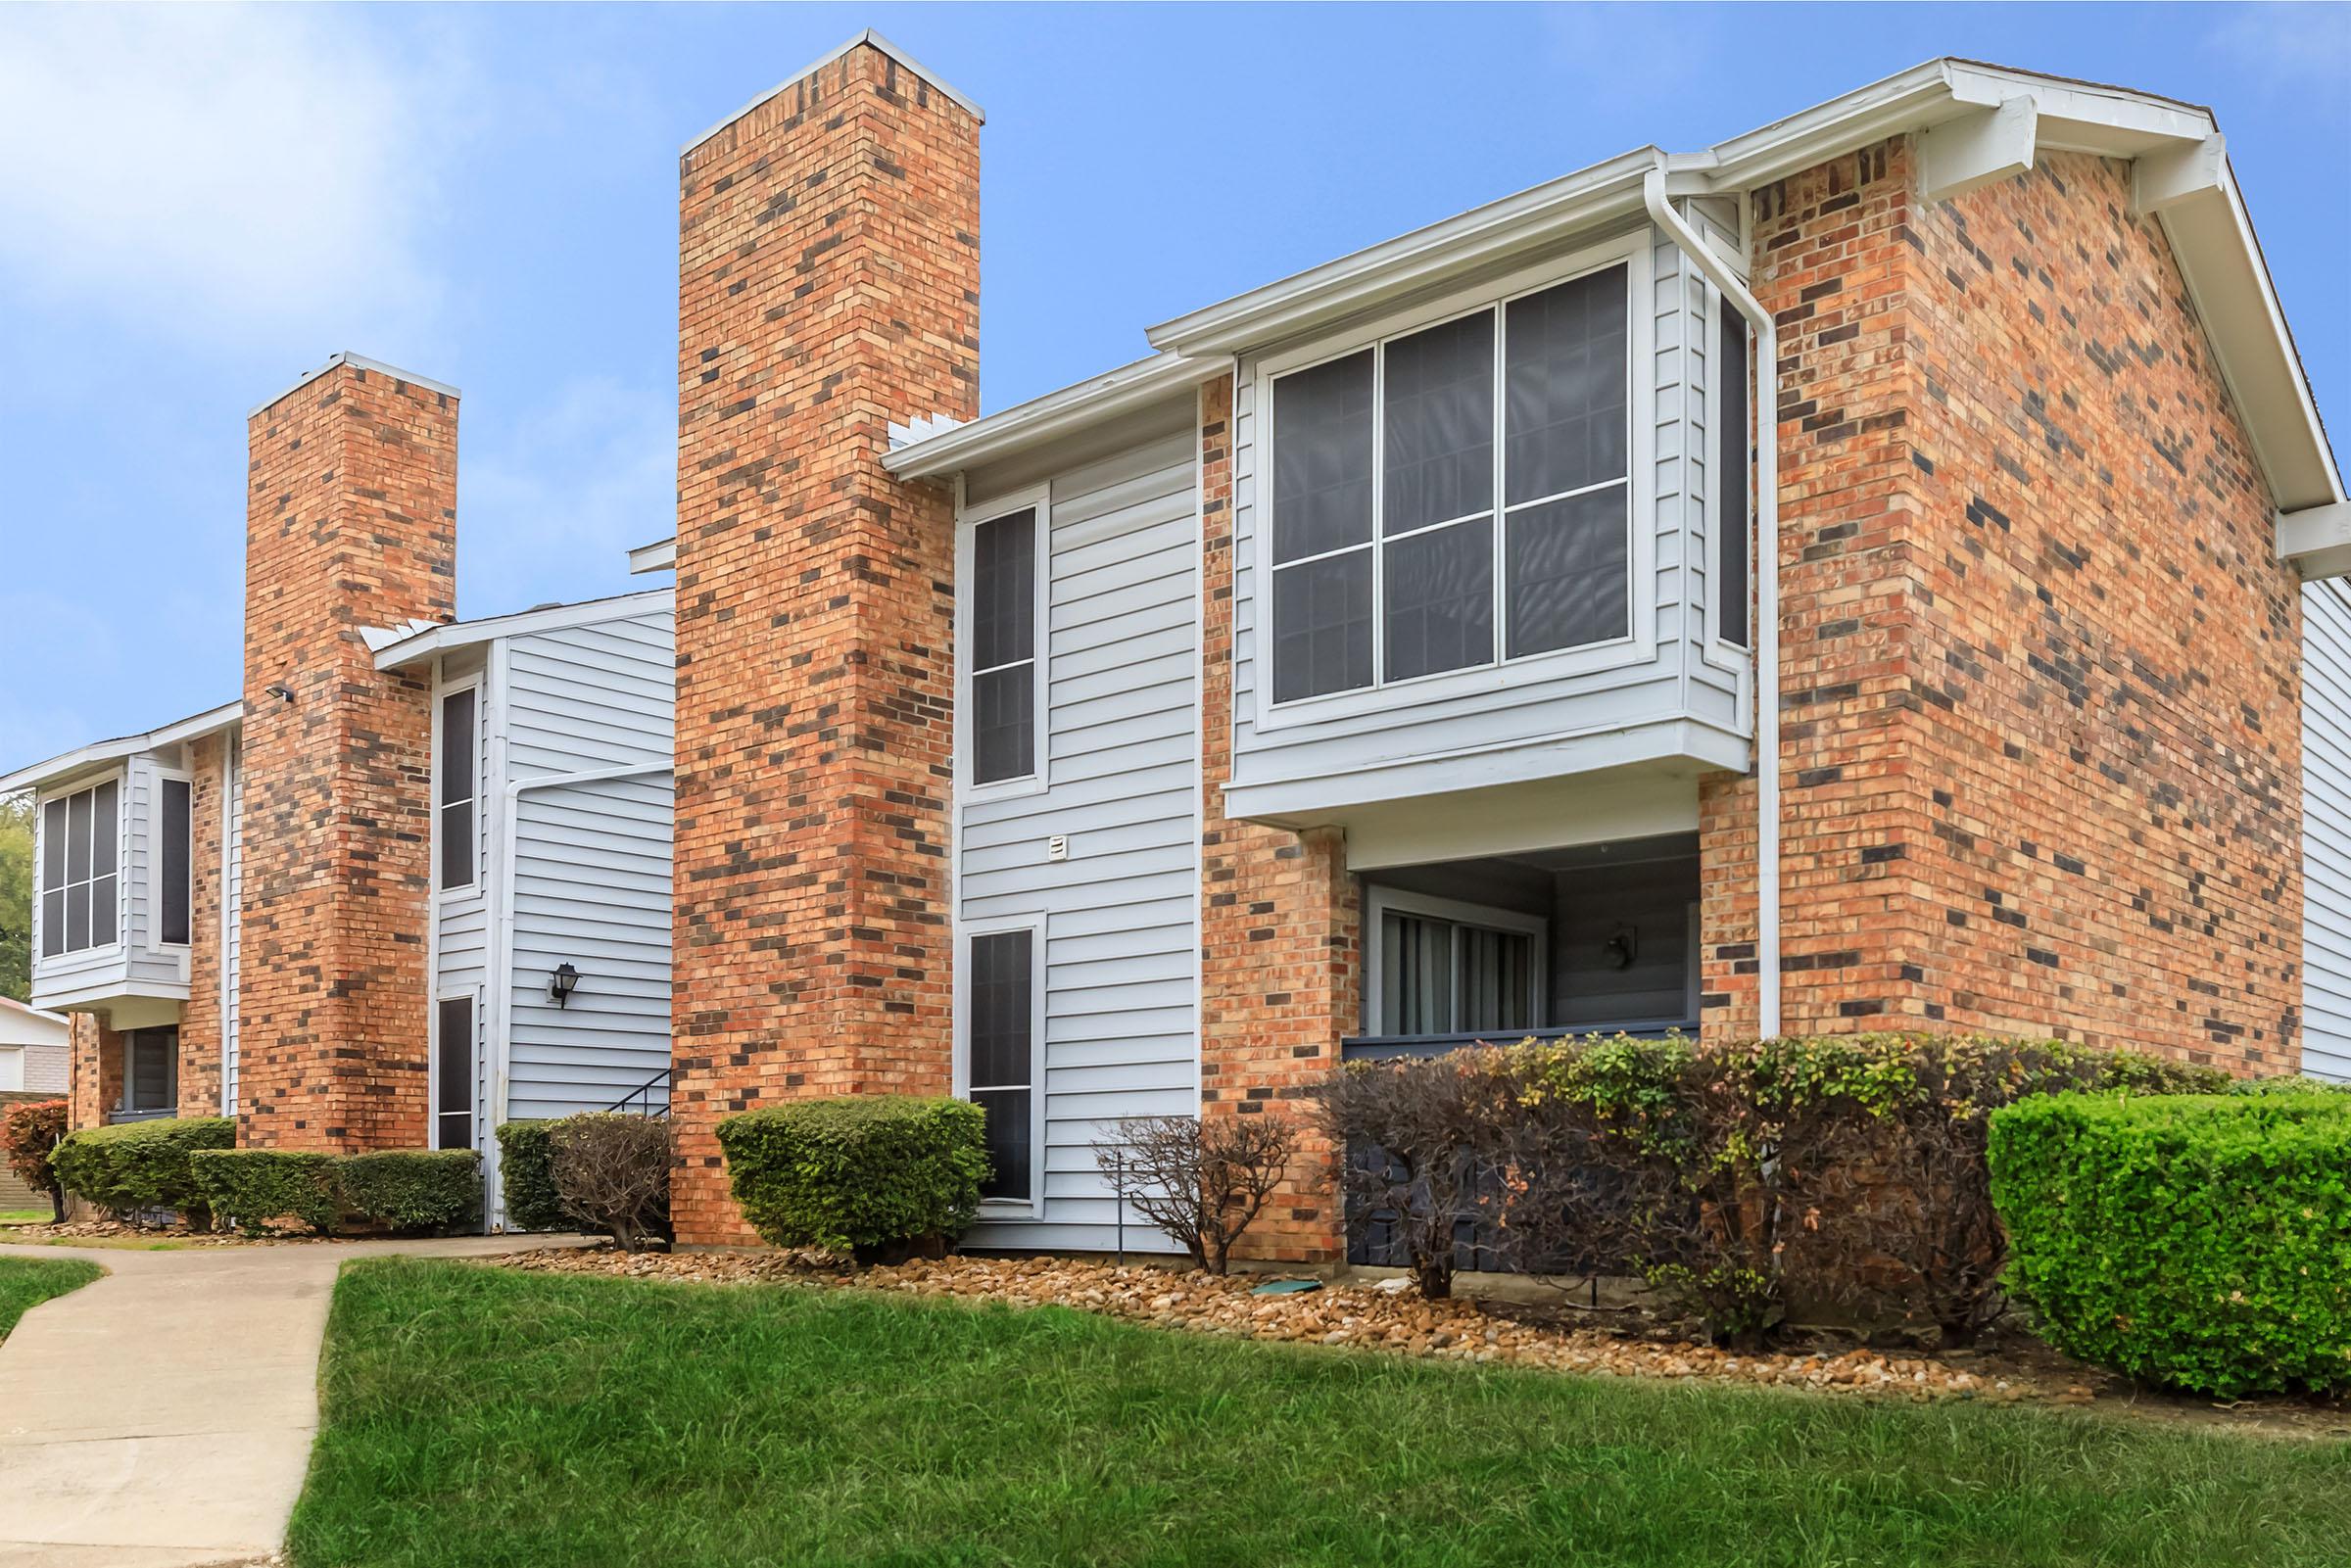 1 & 2 BEDROOM APARTMENTS FOR RENT IN GARLAND, TEXAS